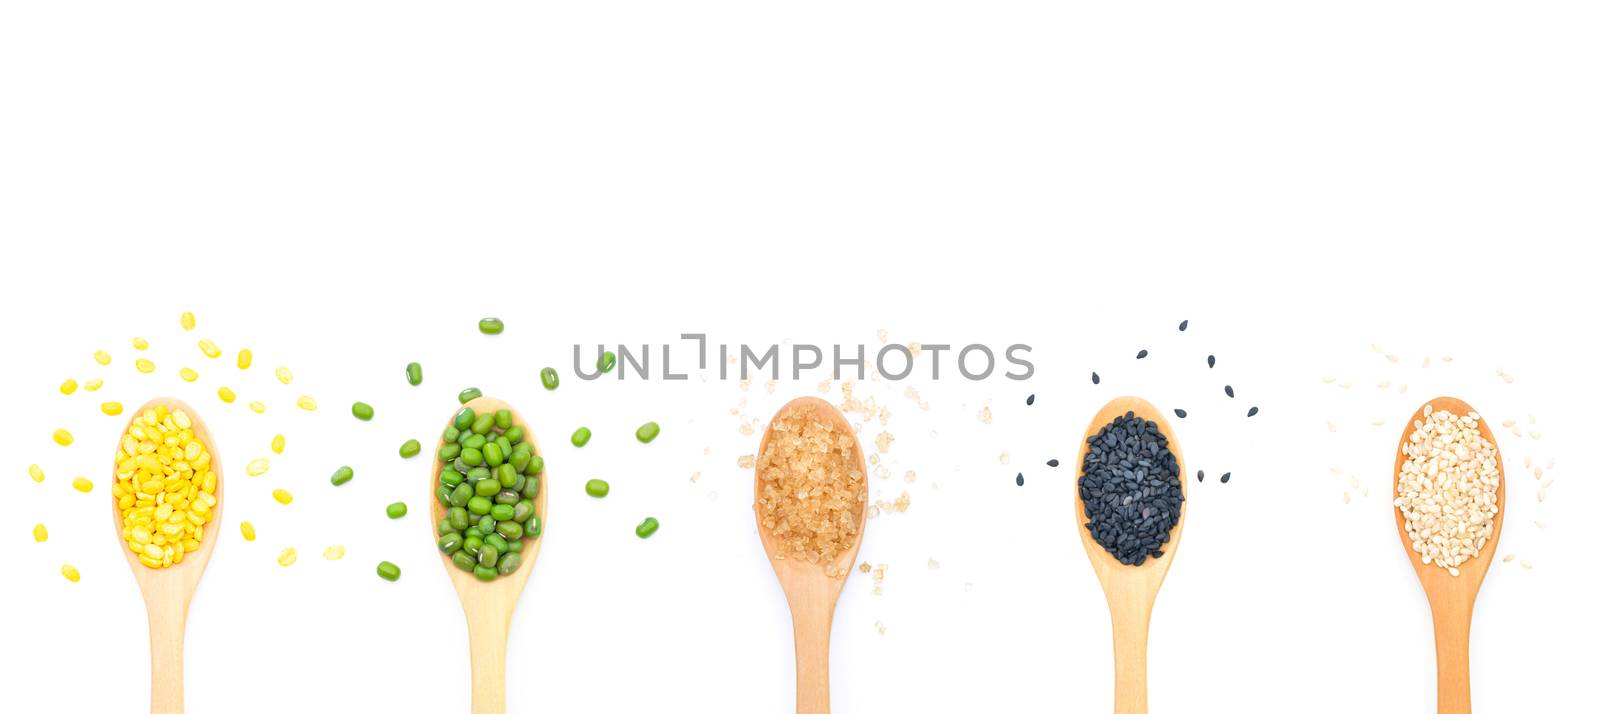 Grains Mung bean, White and Black sesame seeds, Brown sugar in wooden scoop on white background